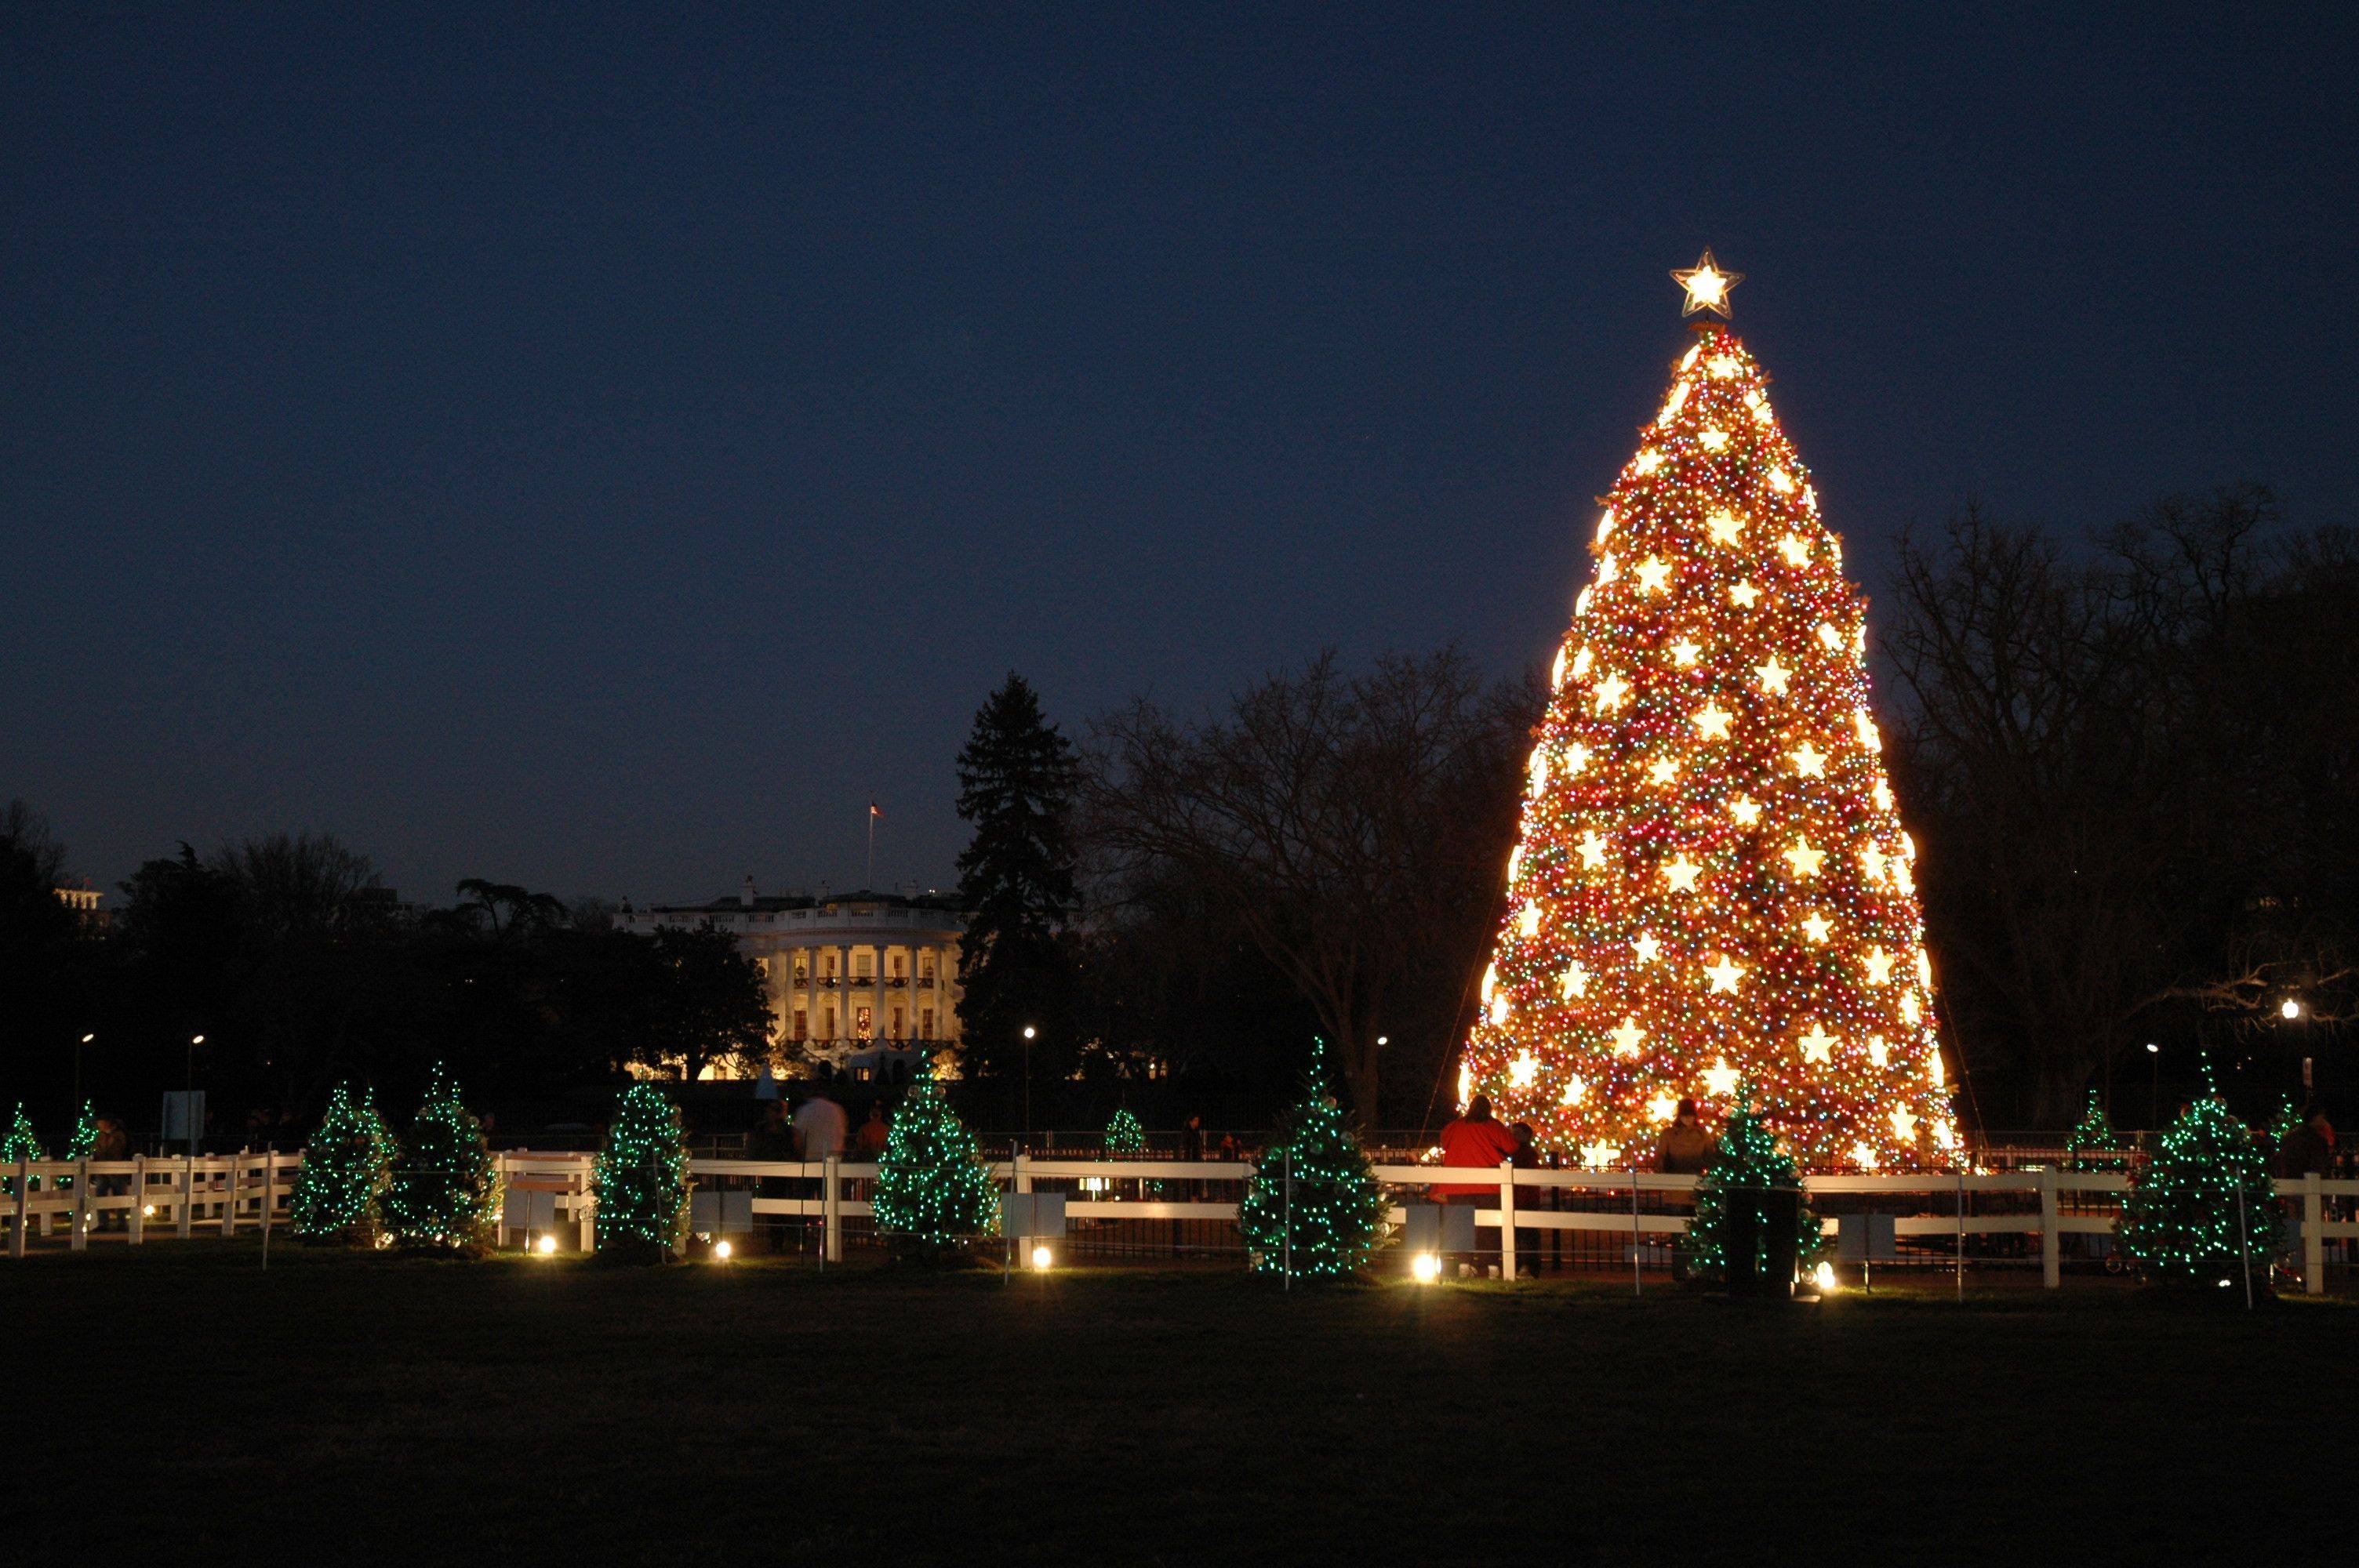 Begin your holiday celebrations with a visit to the National Christmas Tree